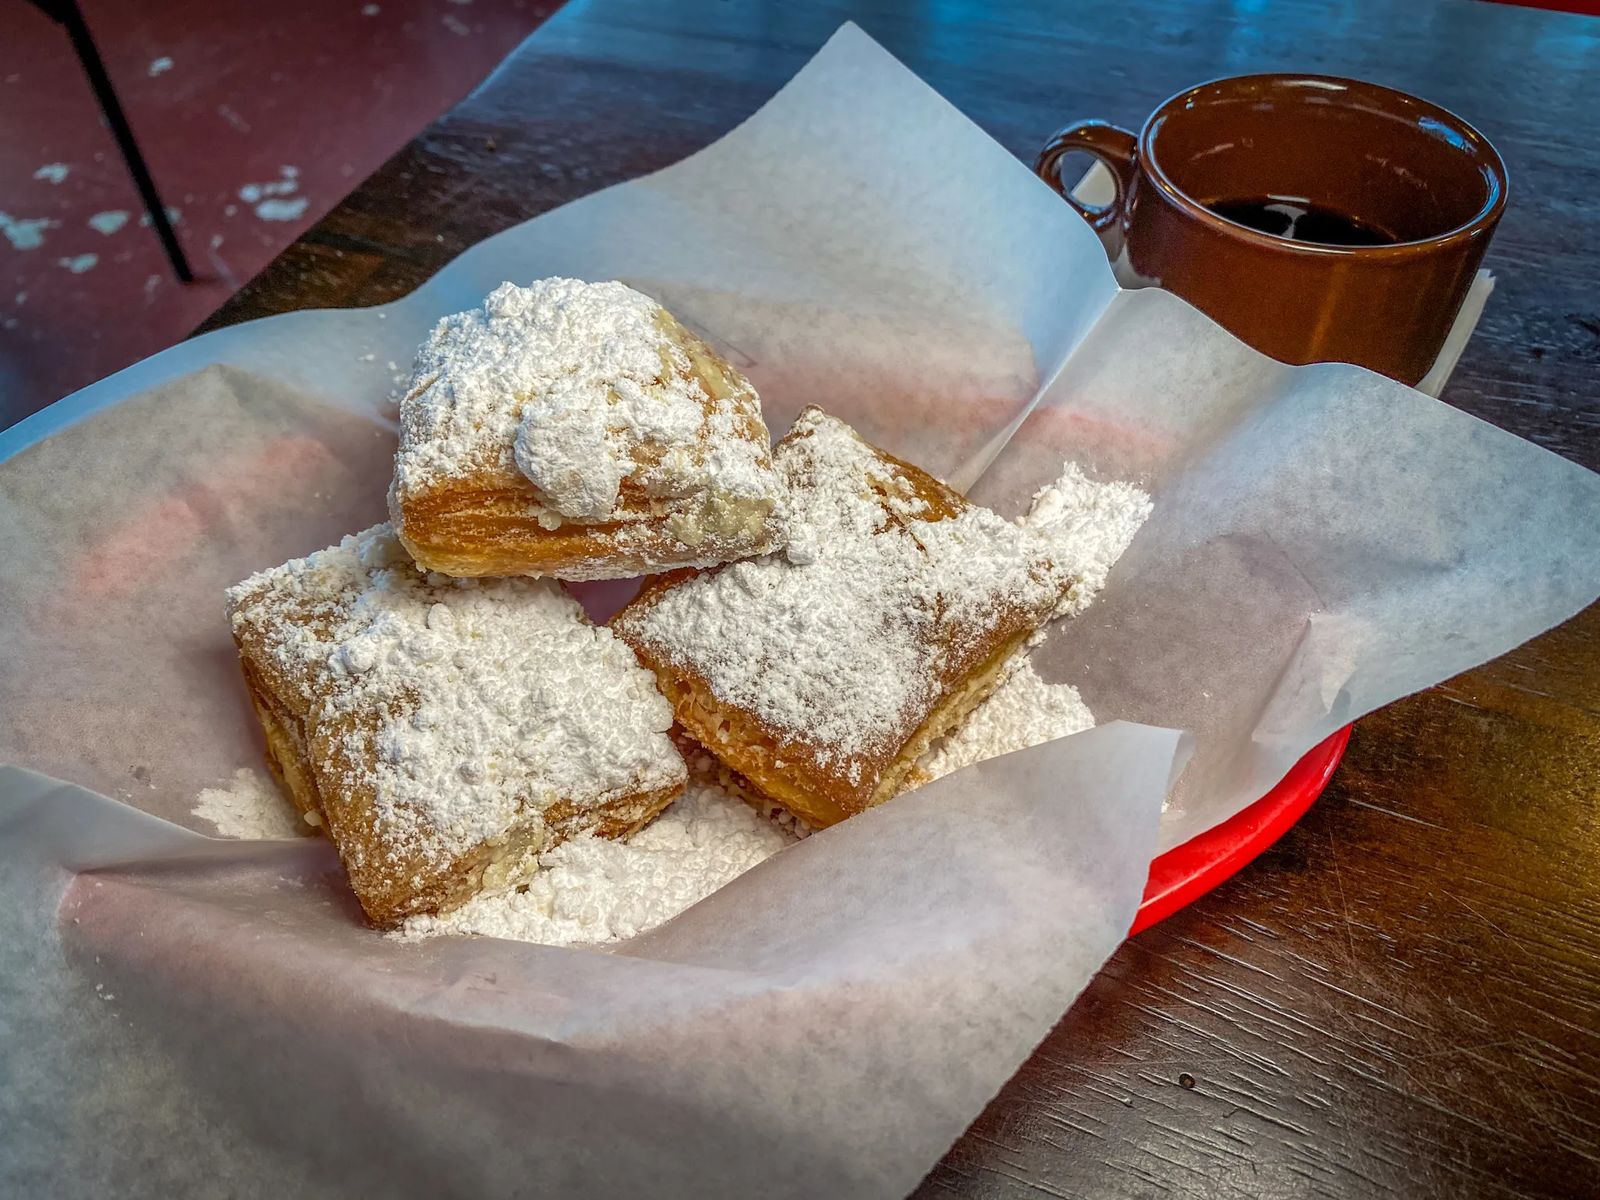 Fluffy Beignets with powdered sugar and coffee